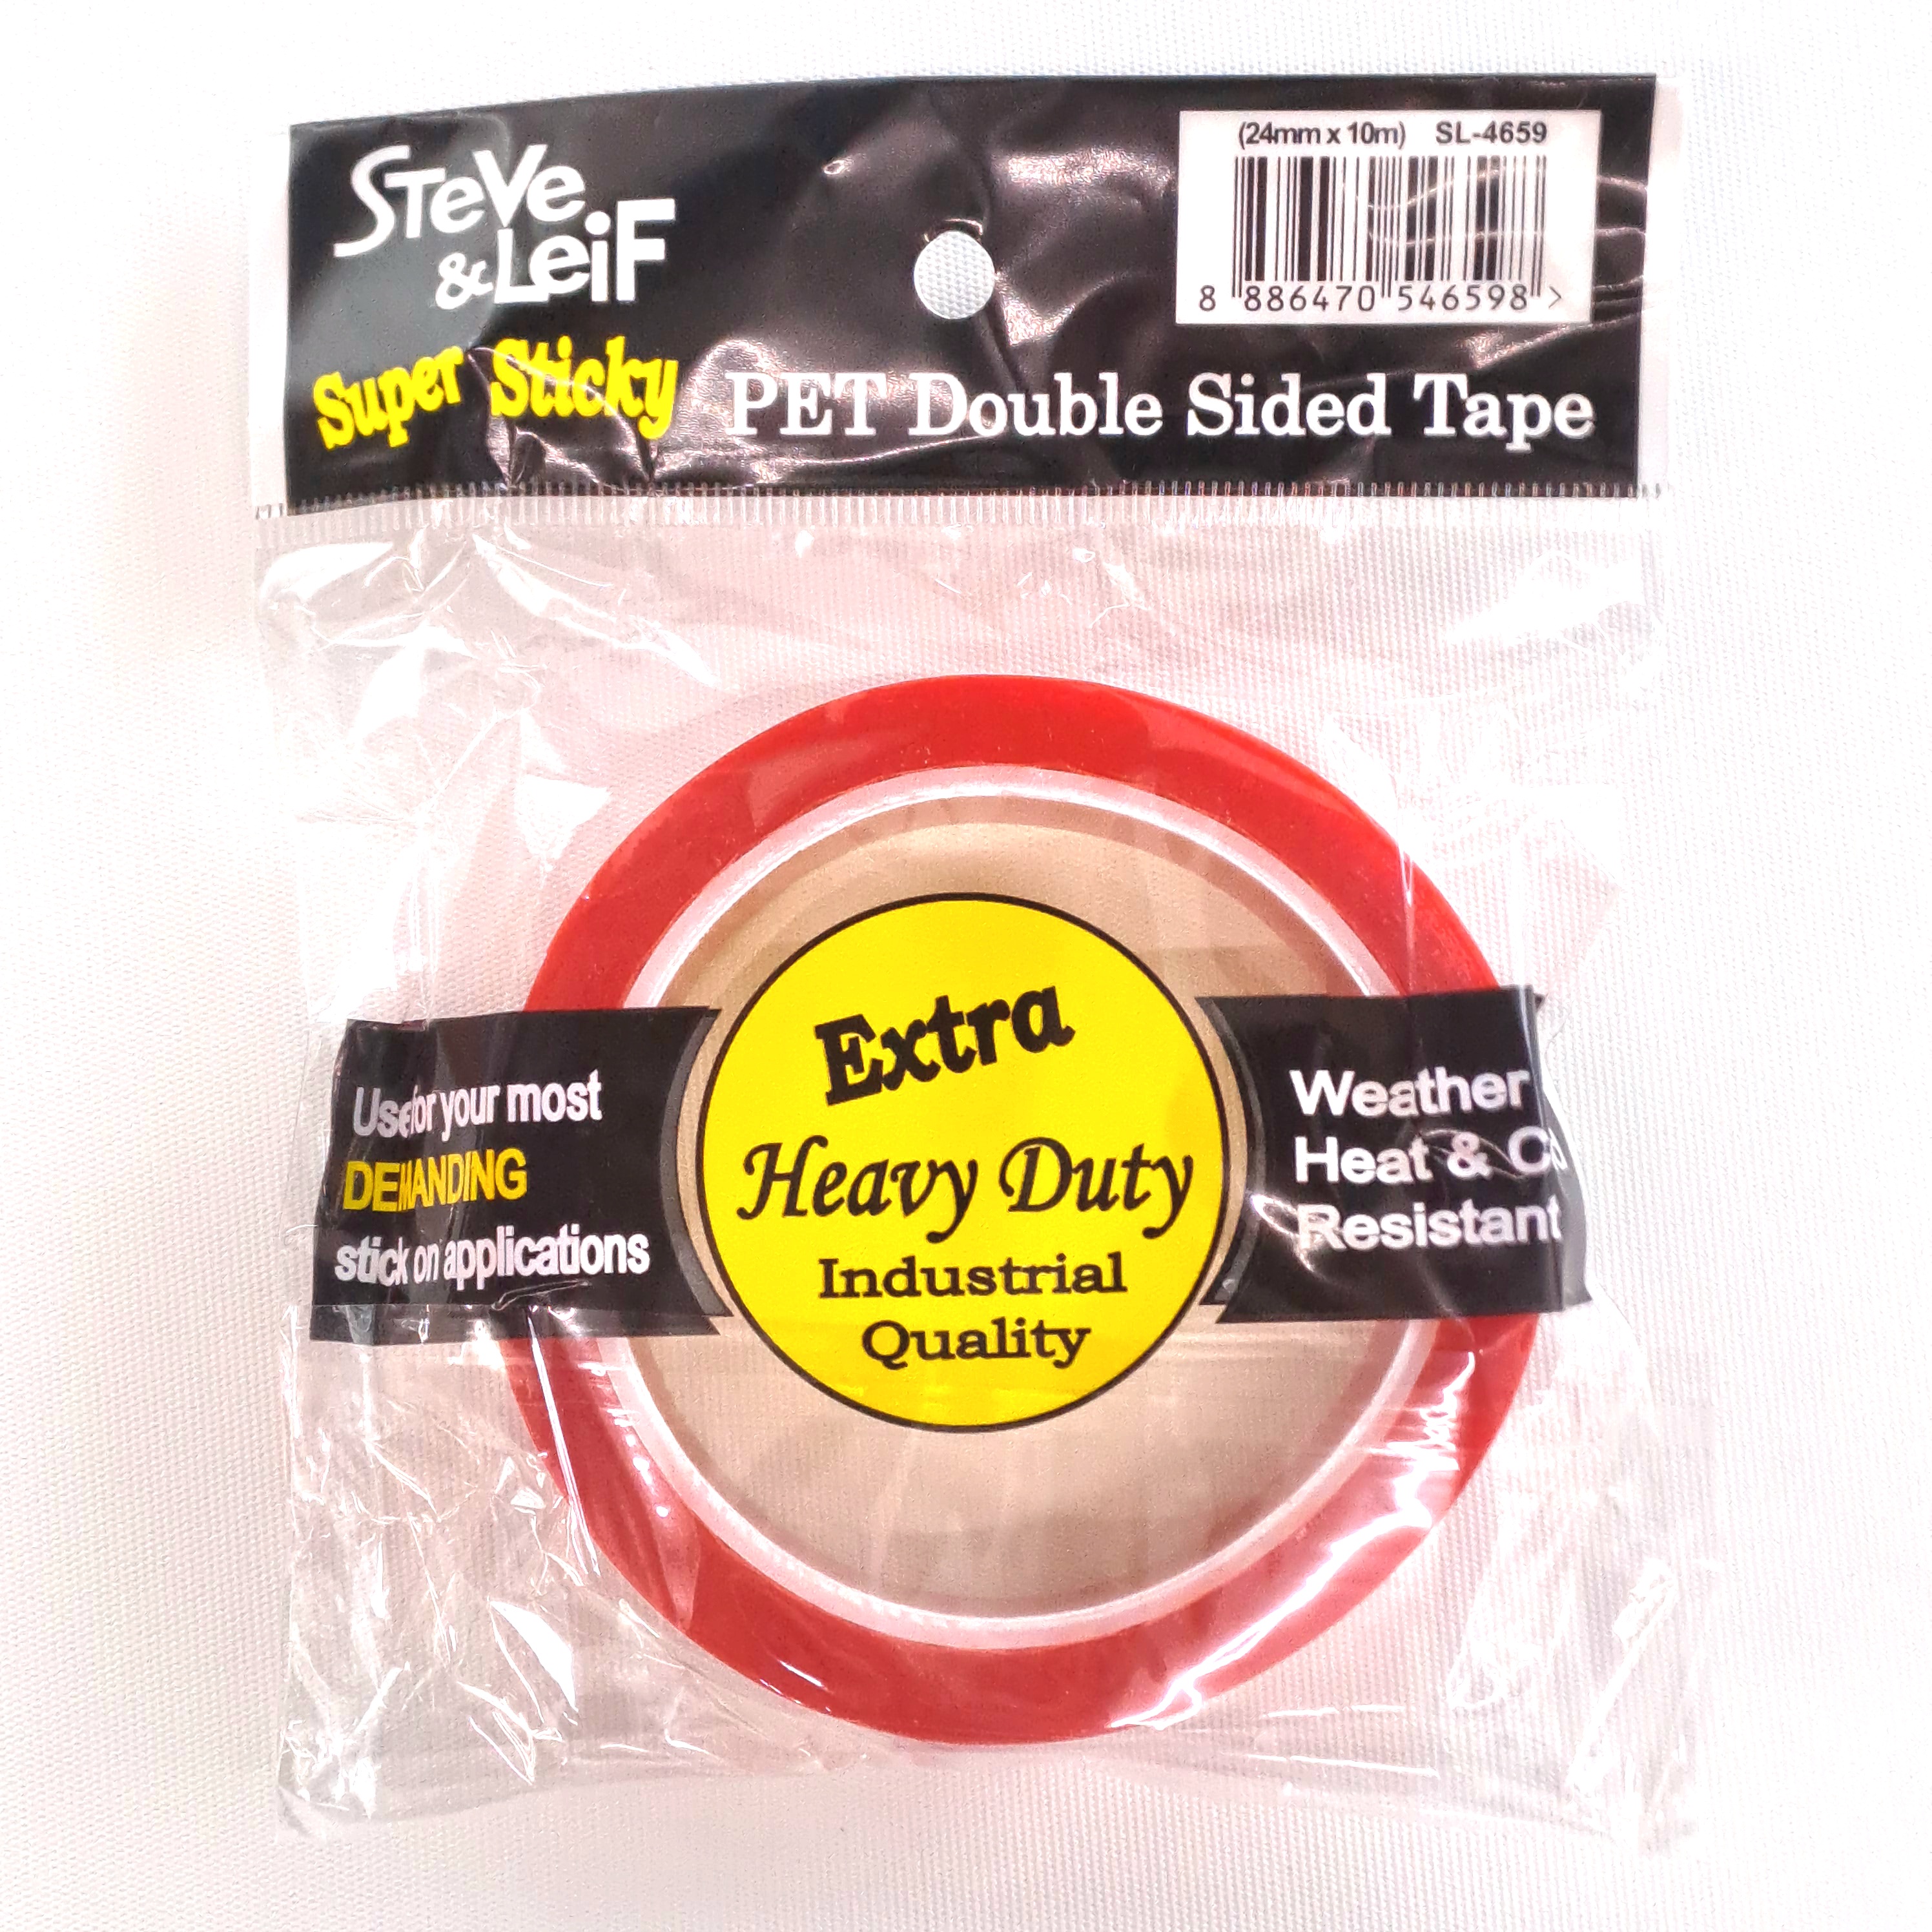 S&L 24mm x 10m Pet Double Sided Tape